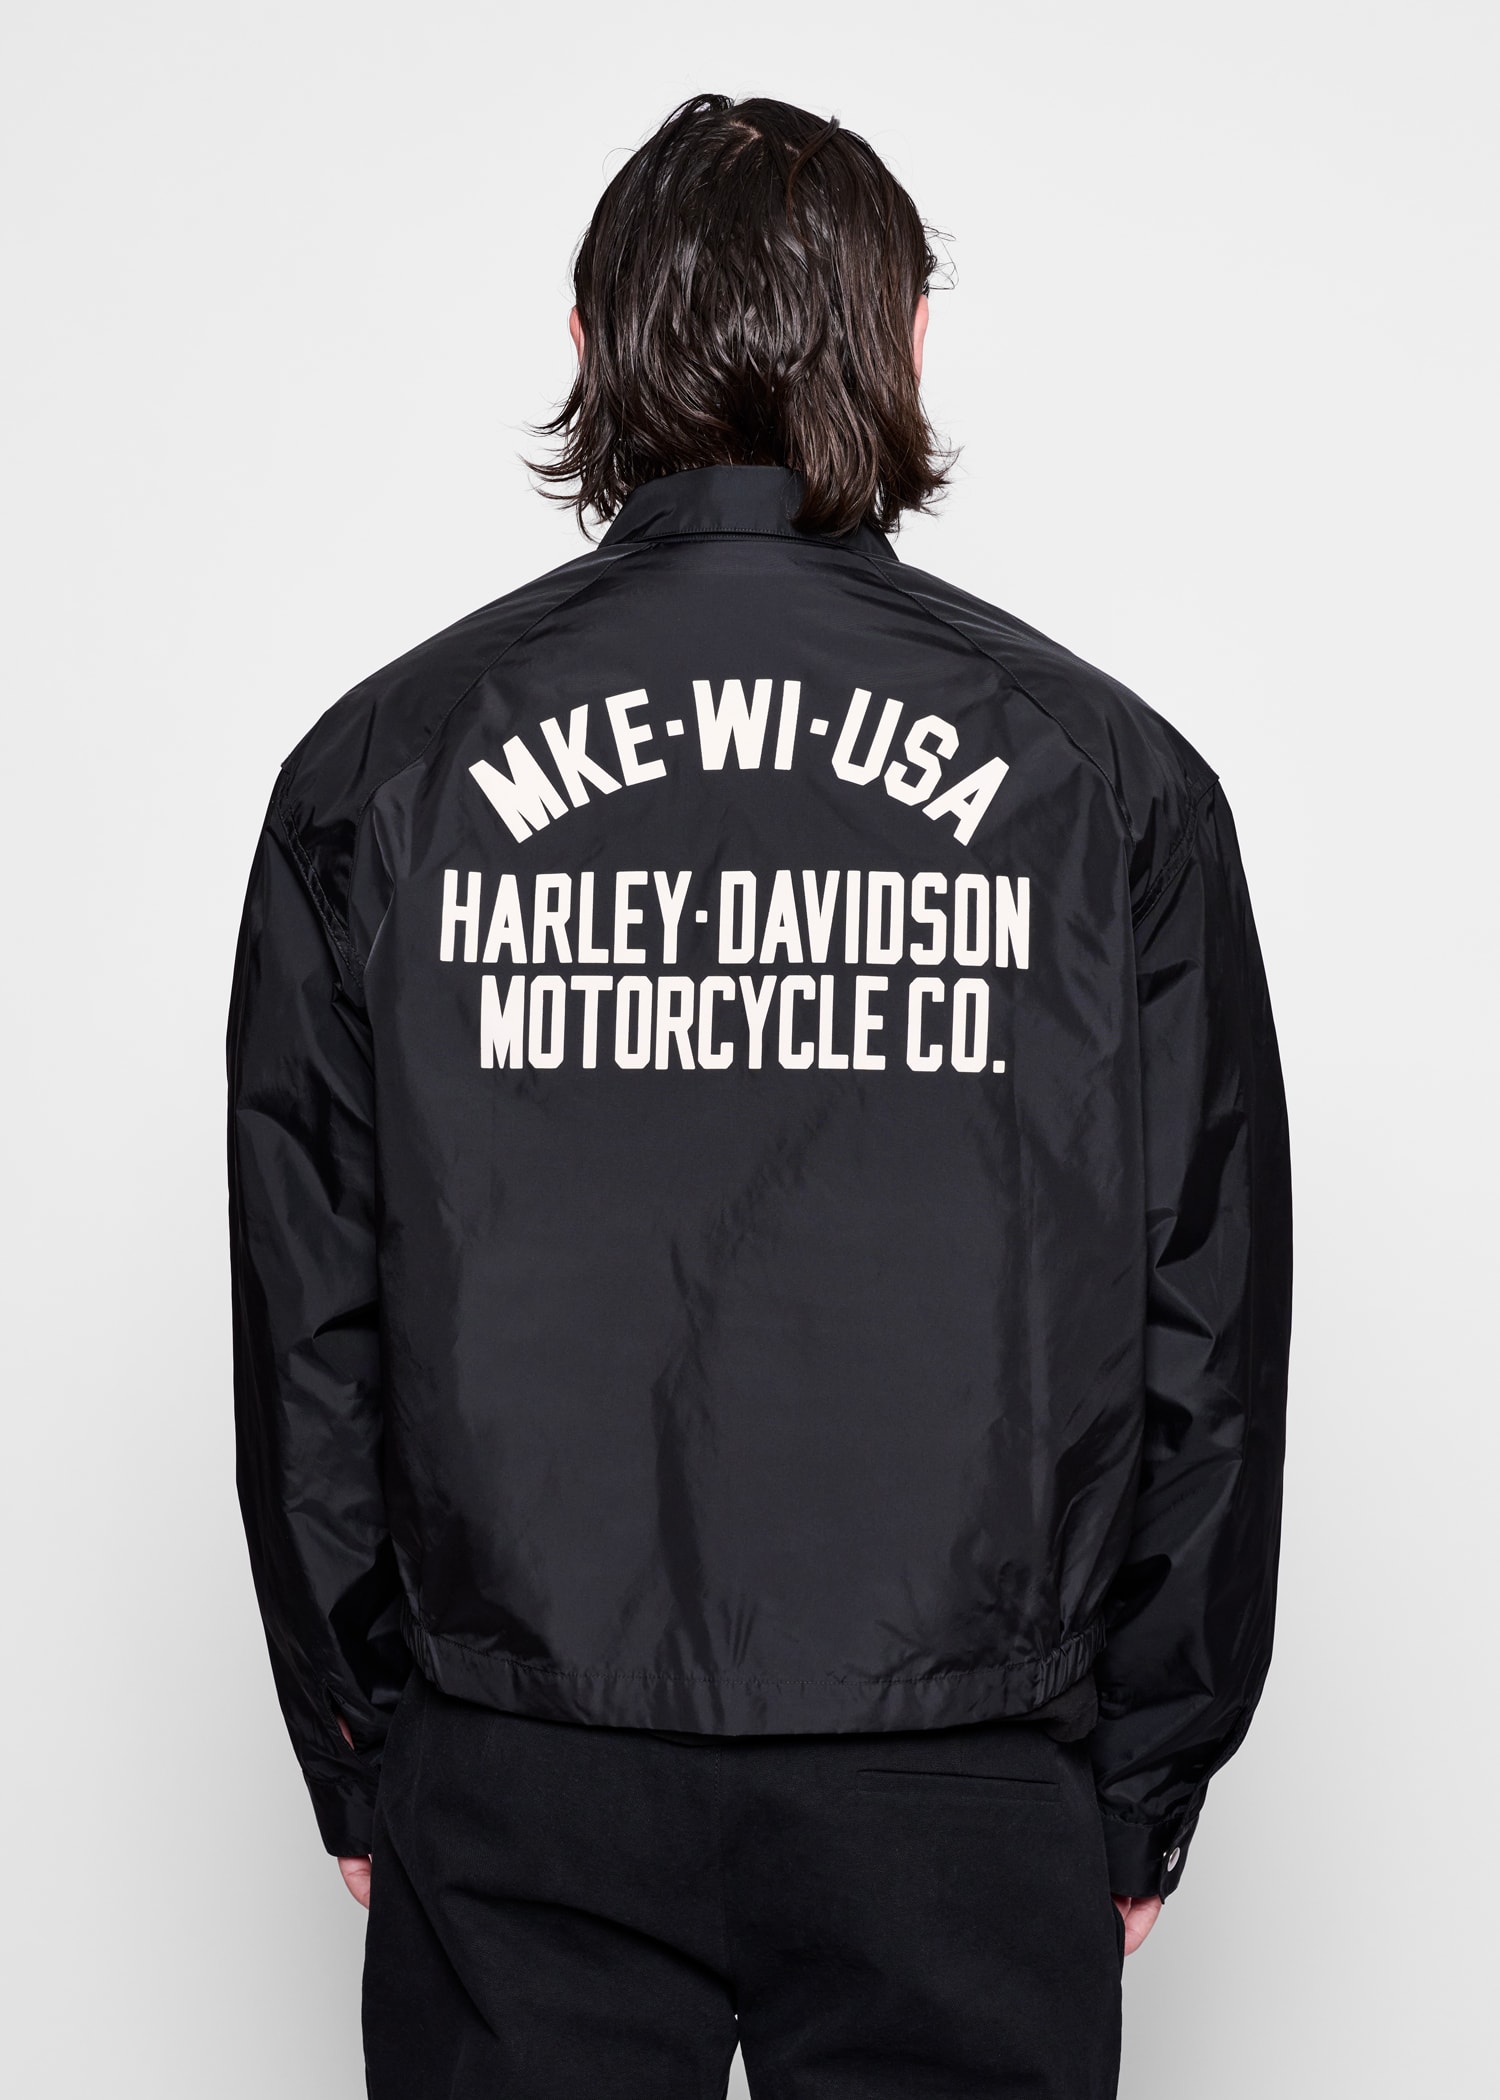 Harley Davidson model is pictured in this